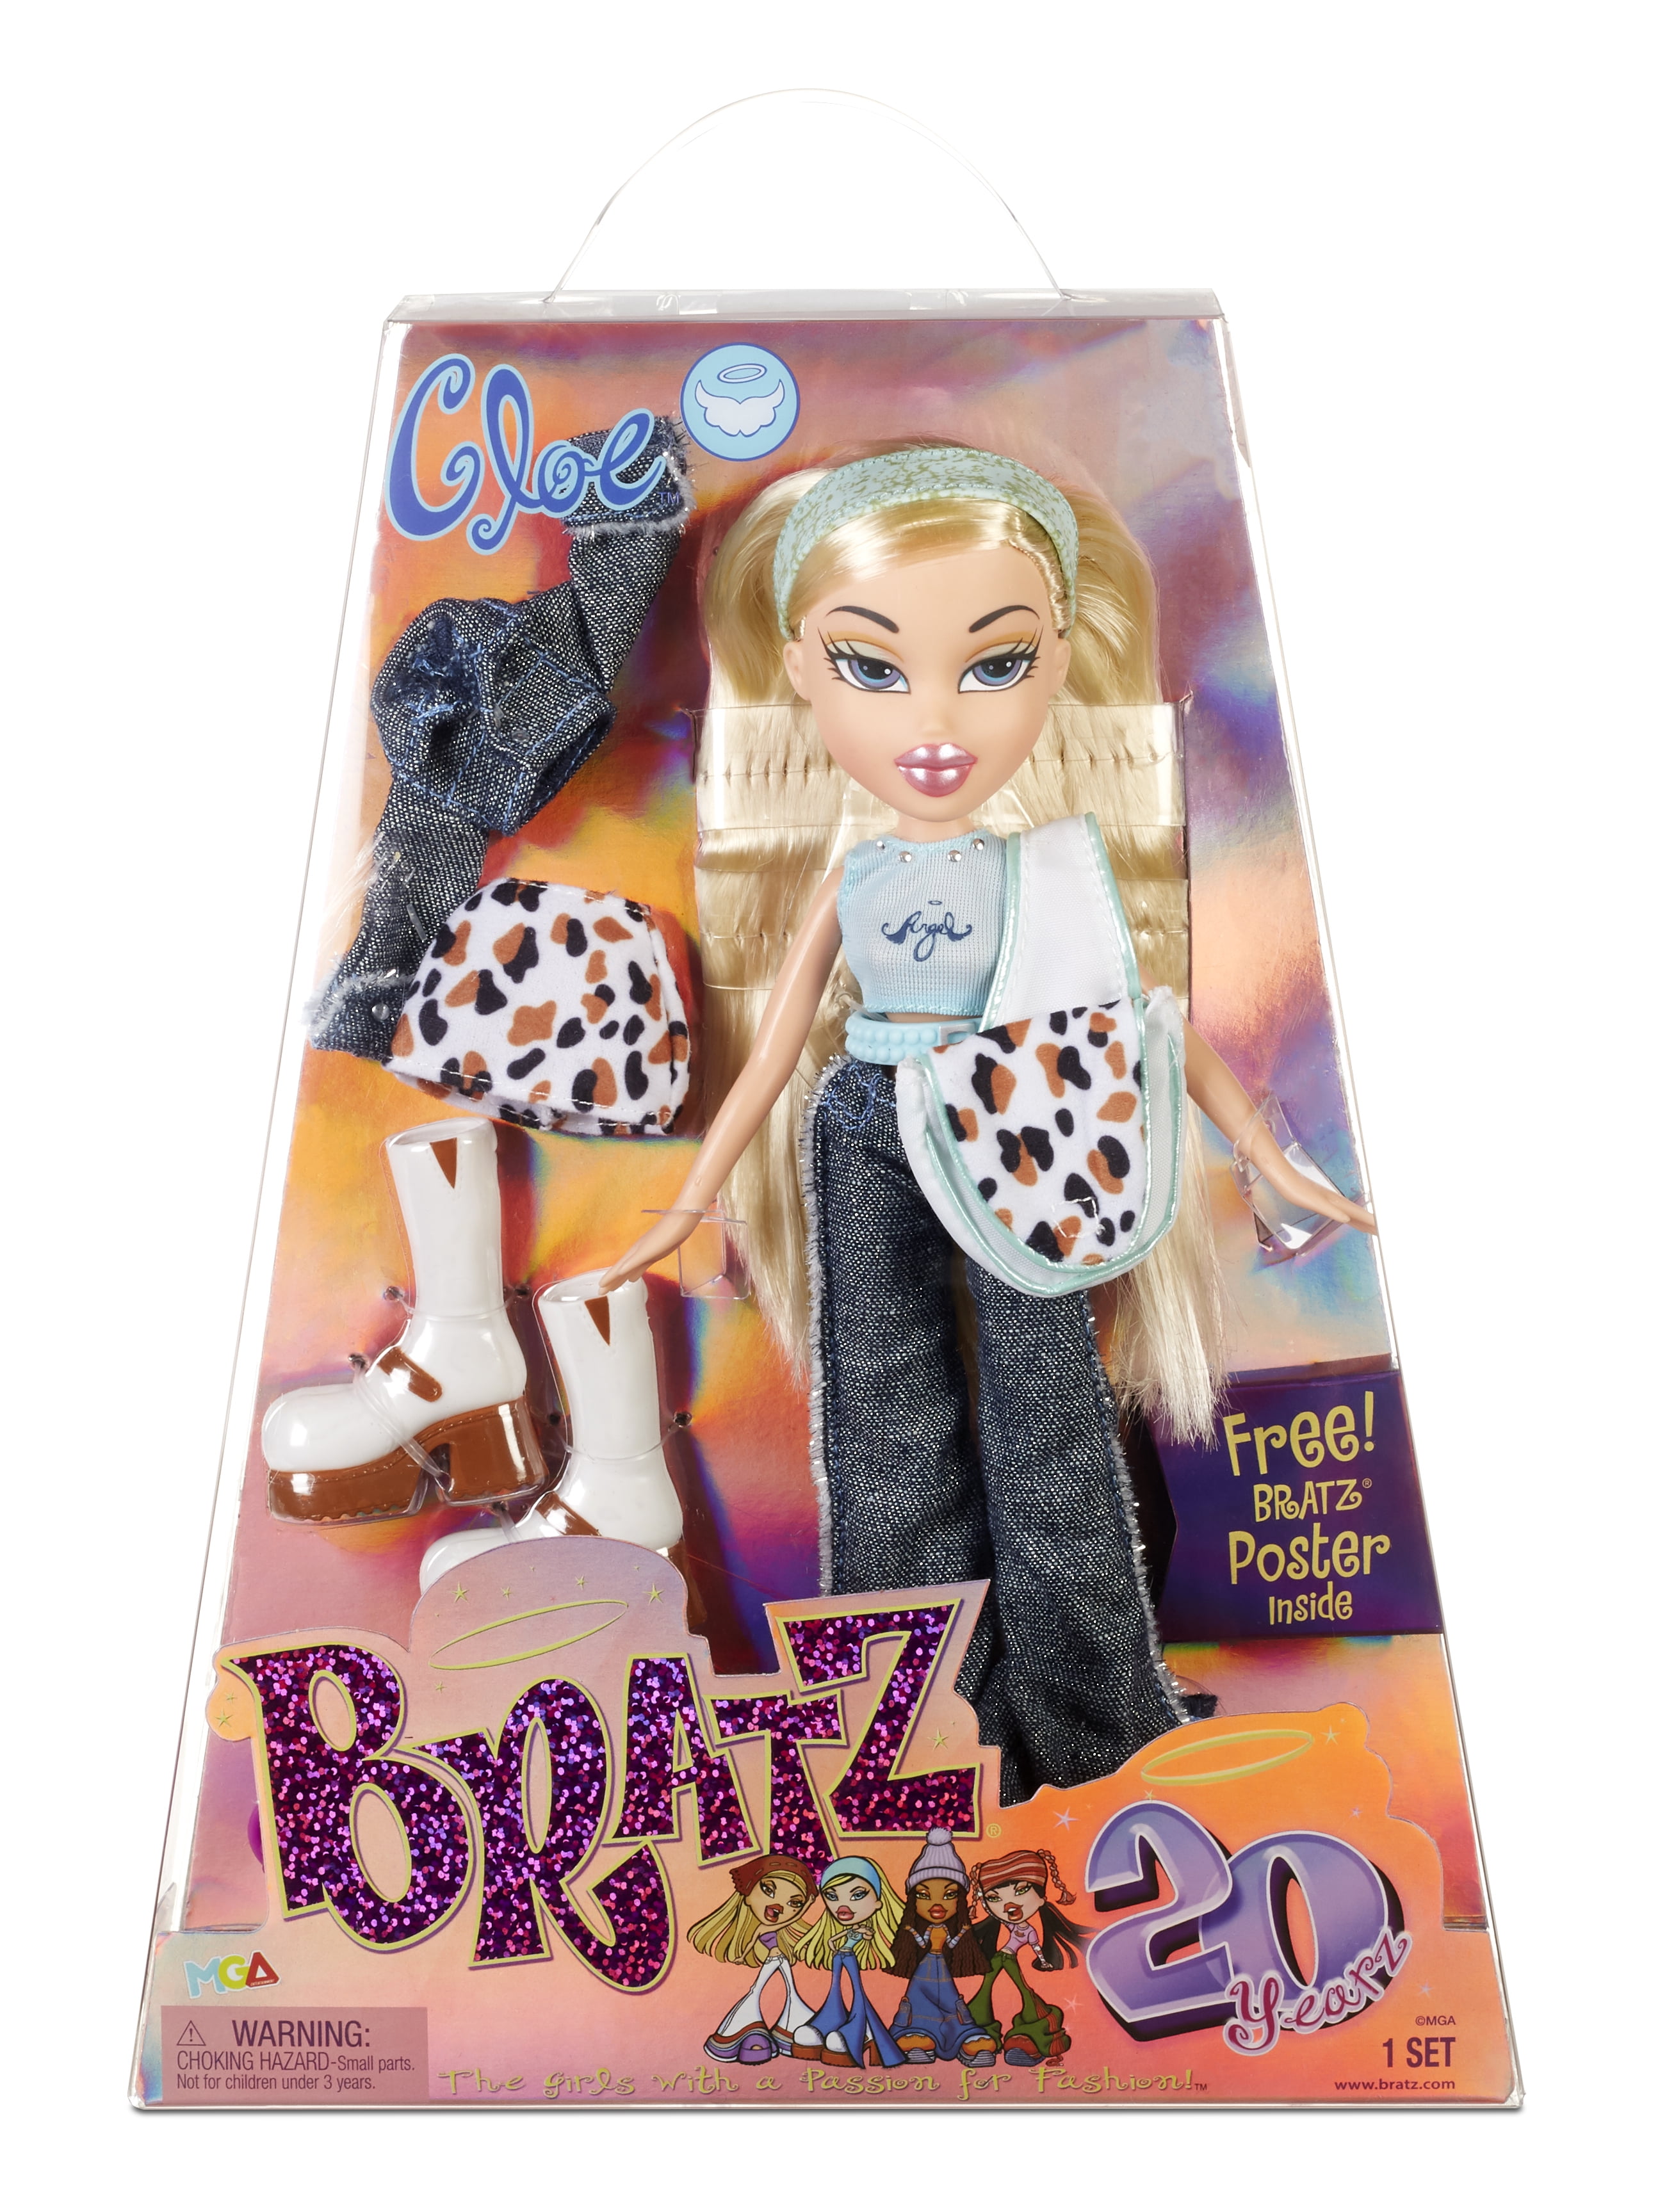 Bratz Dolls for sale large collection to choose from 